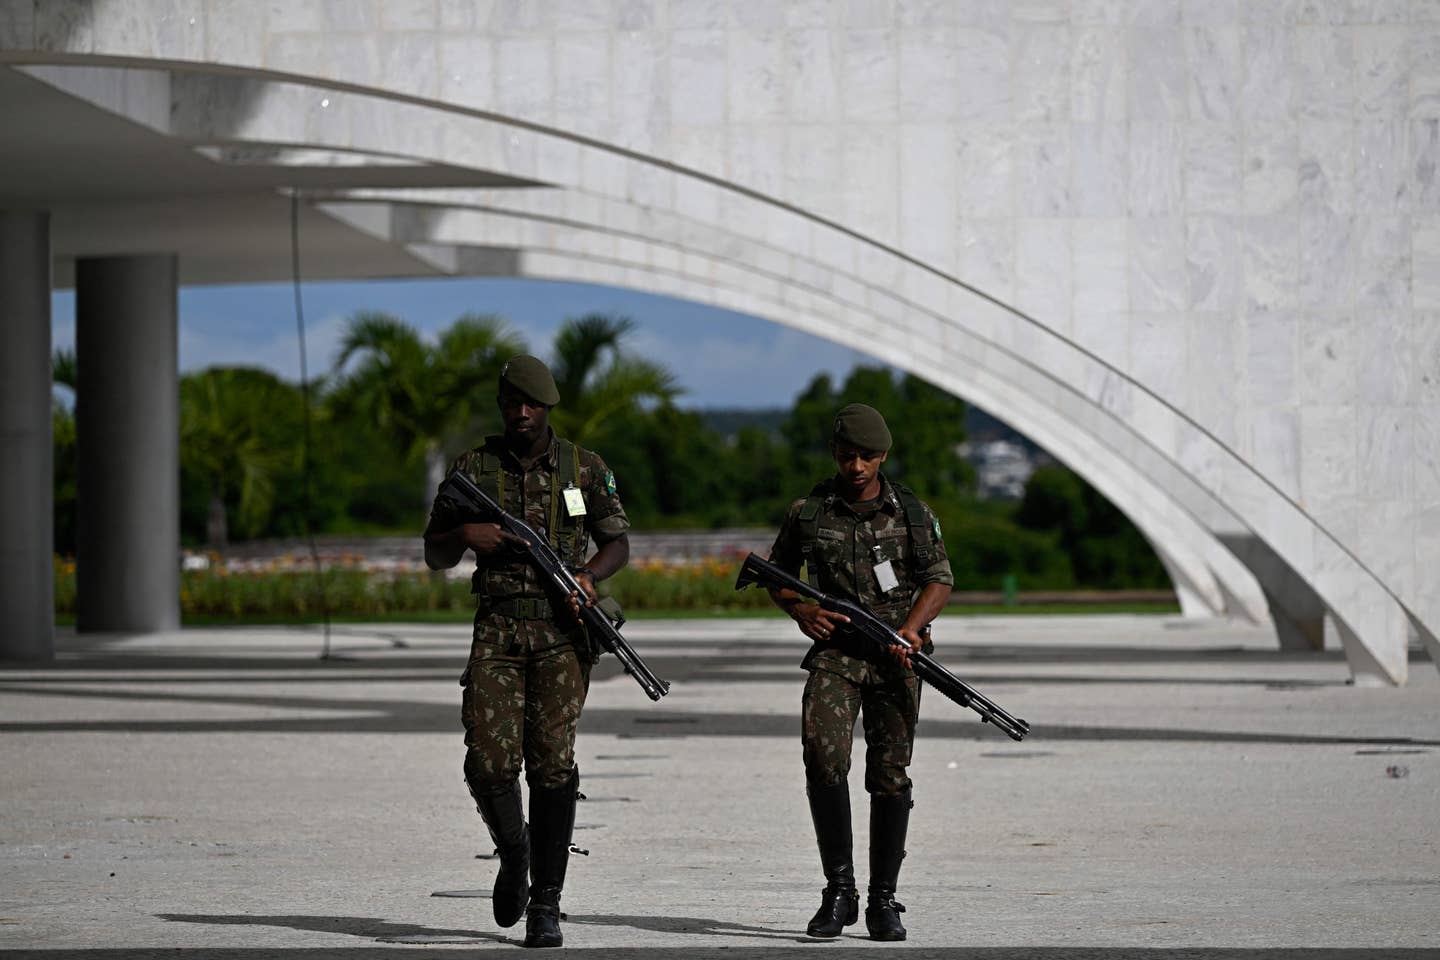 Soldiers on patrol in Brasilia on January 9, 2023, a day after supporters of the far-right ex-president Jair Bolsonaro invaded the Congress, Presidential Palace, and Supreme Court. <em>Photo by MAURO PIMENTEL/AFP via Getty Images</em>